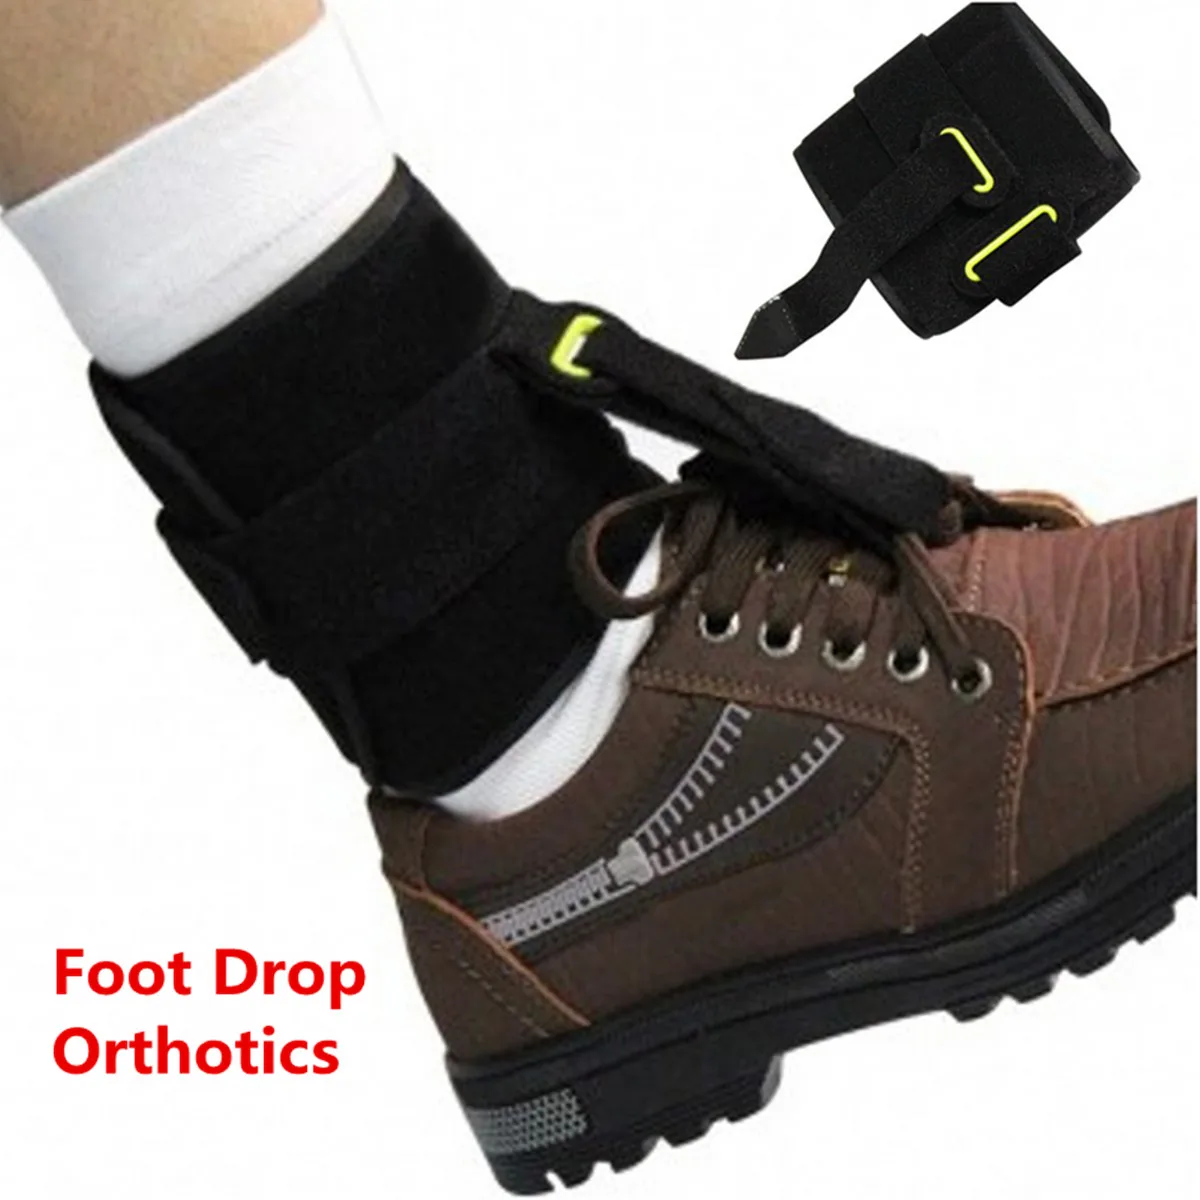  Foot Drop Posture Corrector Adjustable Ankle Brace Correction Supports Strap Plantar Fasciitis Day 